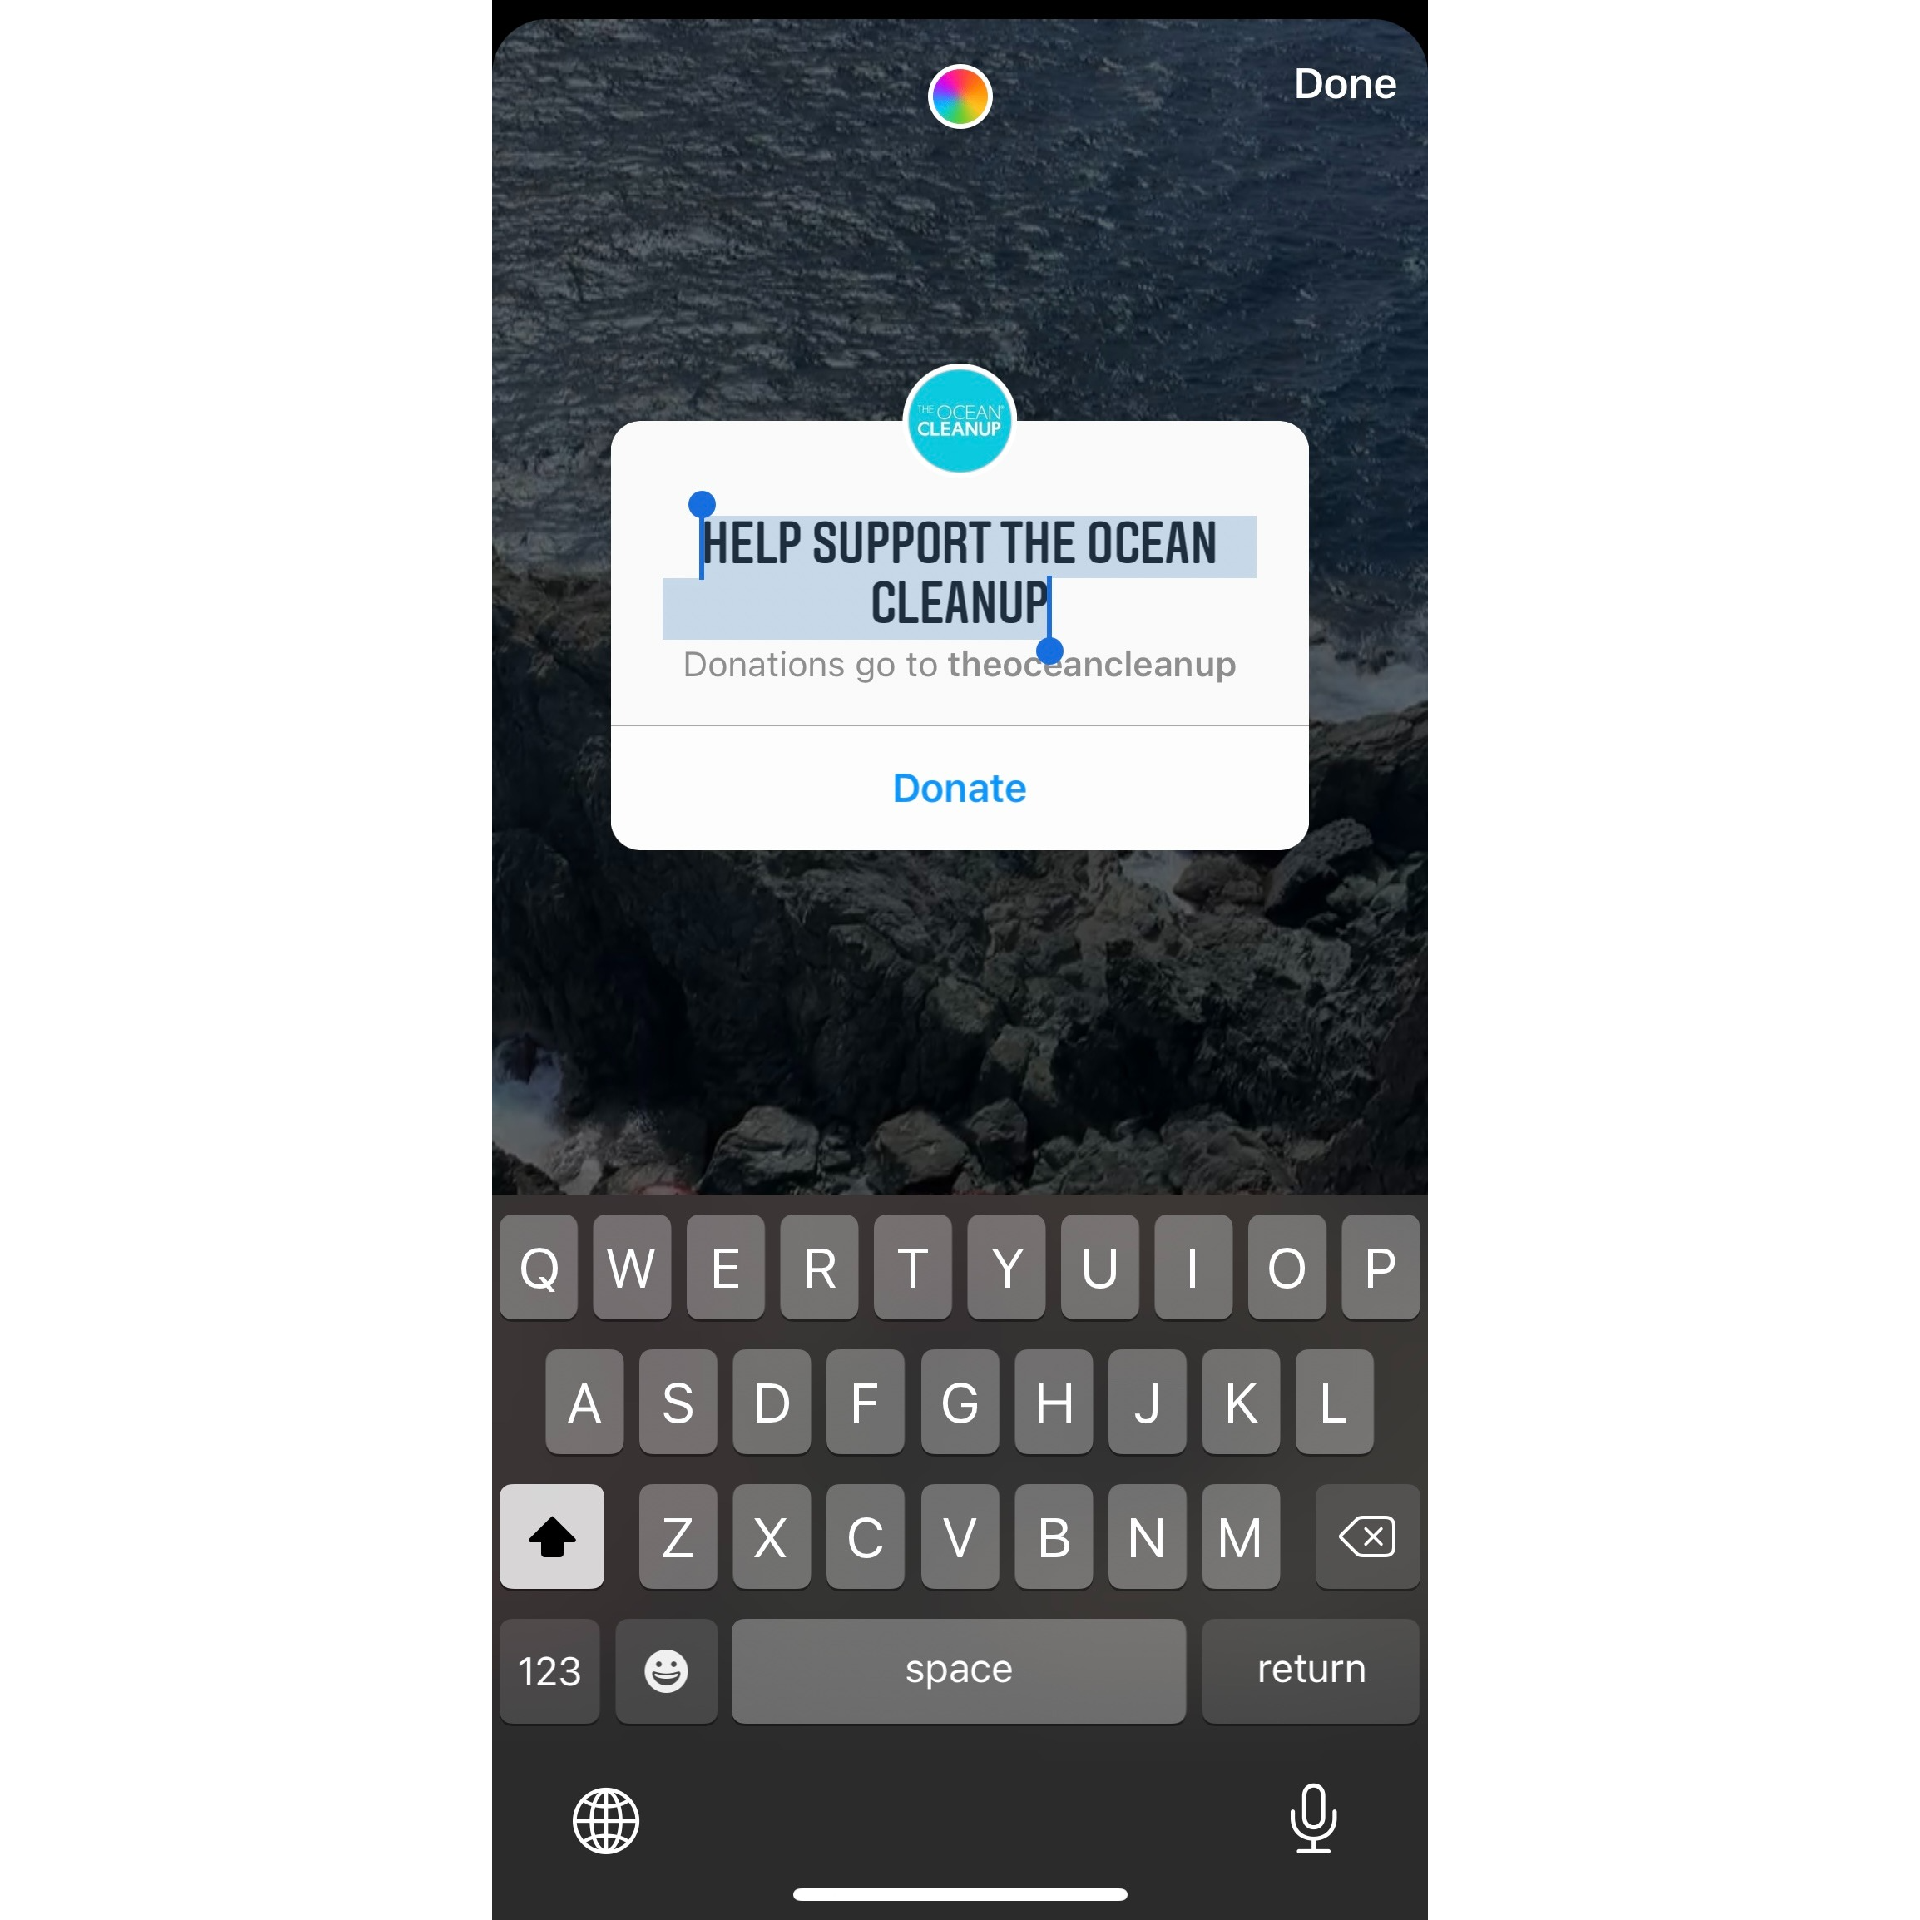 Customize the Donation Sticker text in Instagram Stories with a unique call to action.